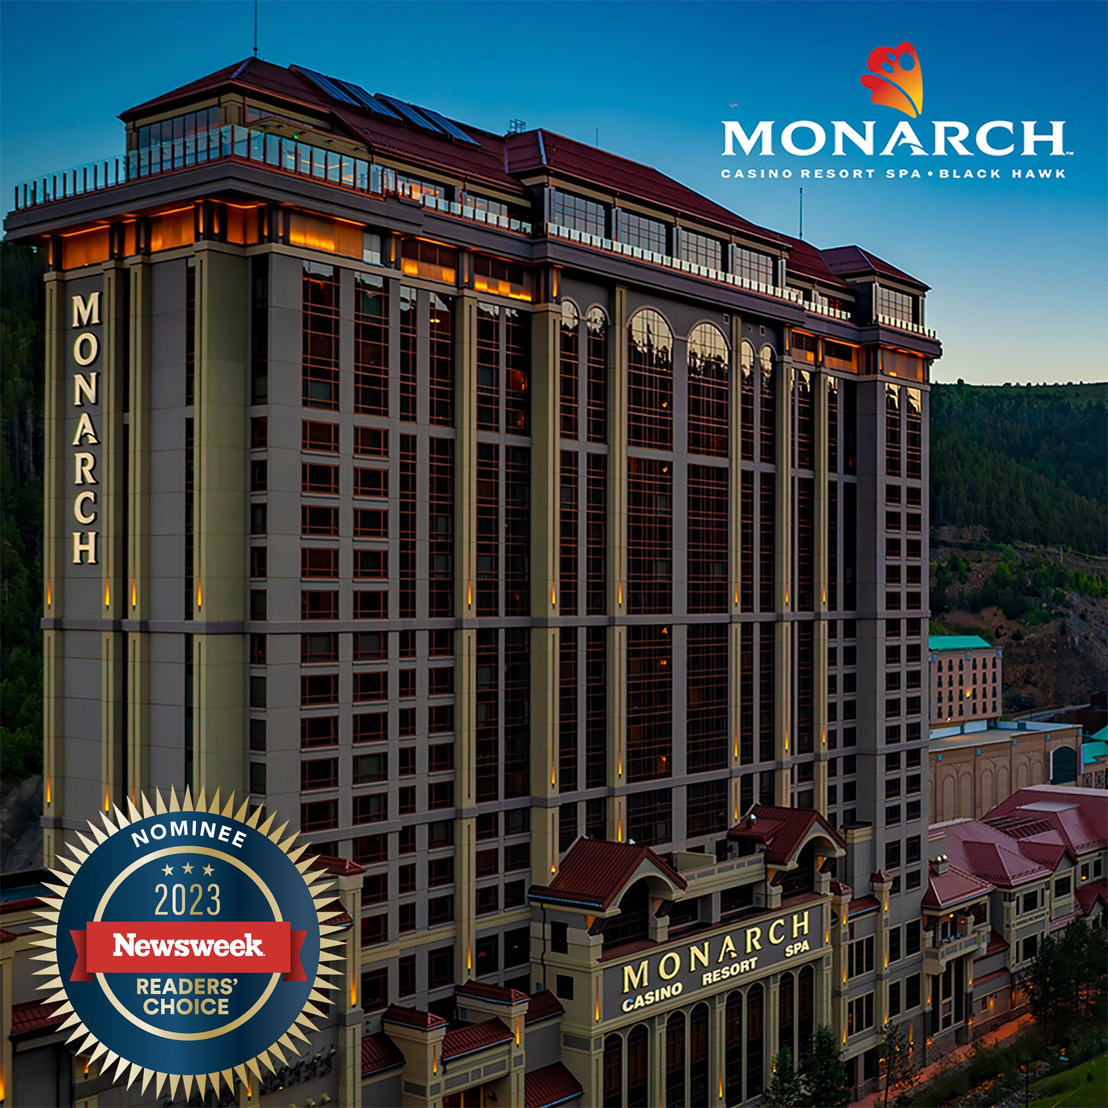 Monarch Casino Resort Spa Nominated by Newsweek Reader’s Choice for “Best Overall Casino Outside of Las Vegas”